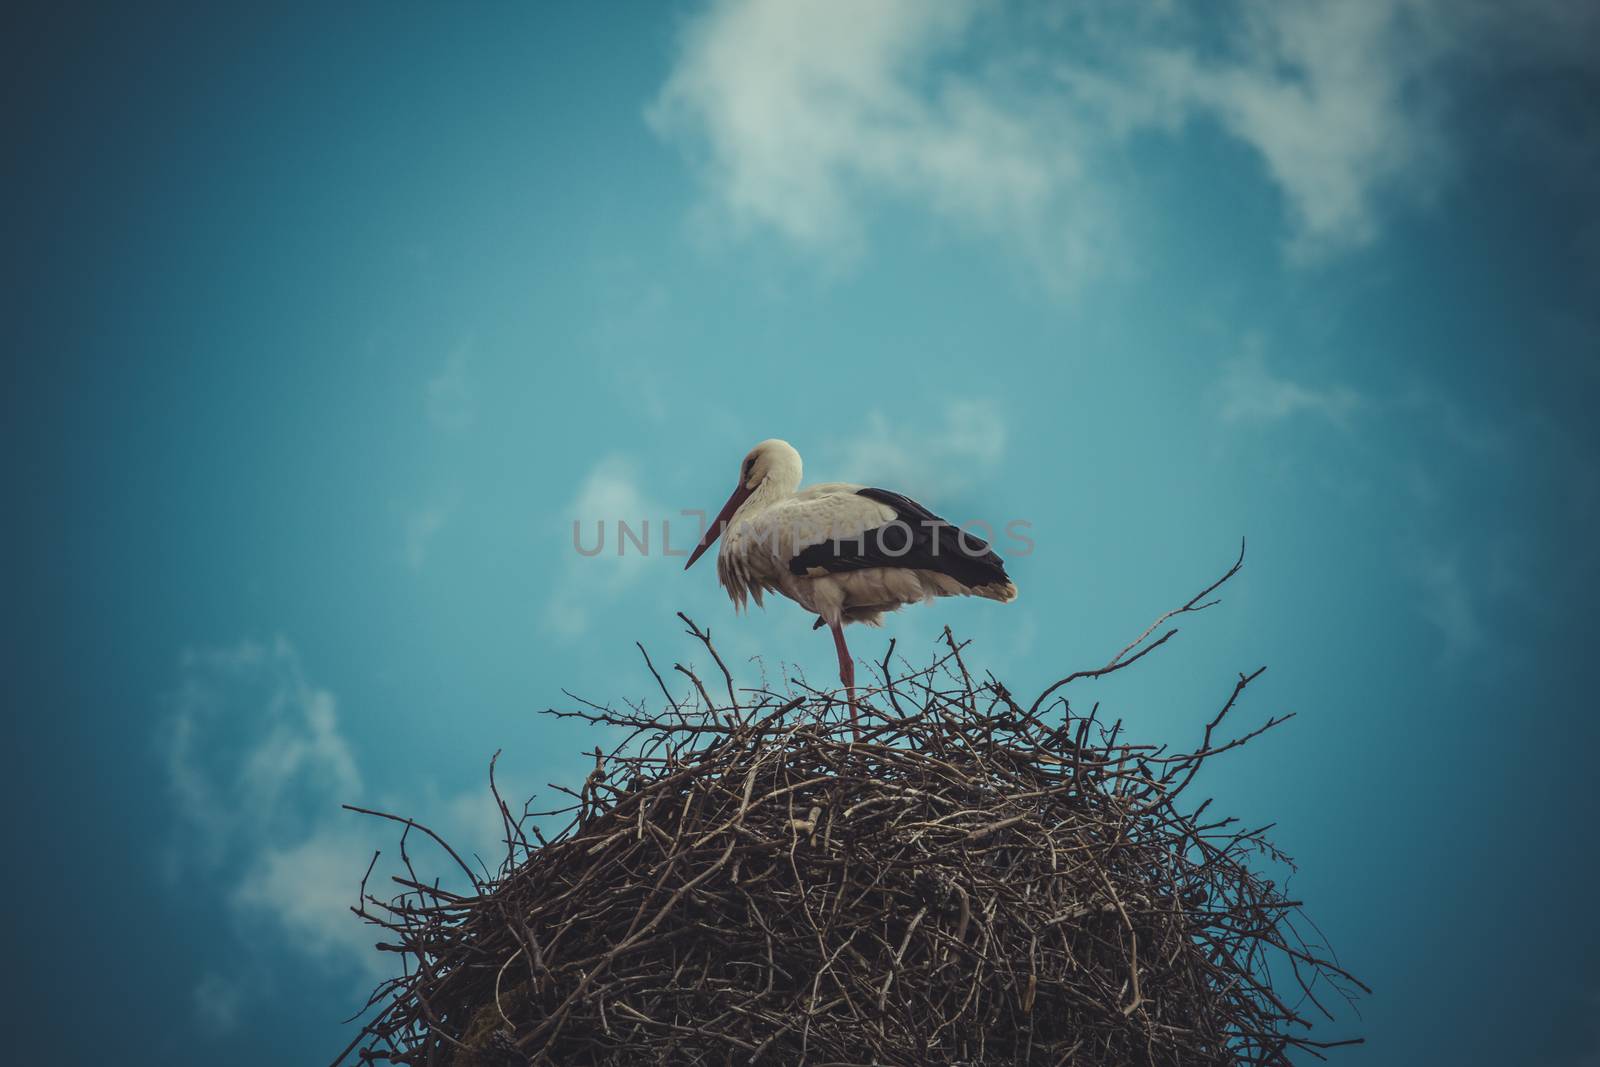 Season, Stork nest made ������of tree branches over blue sky in dramatic